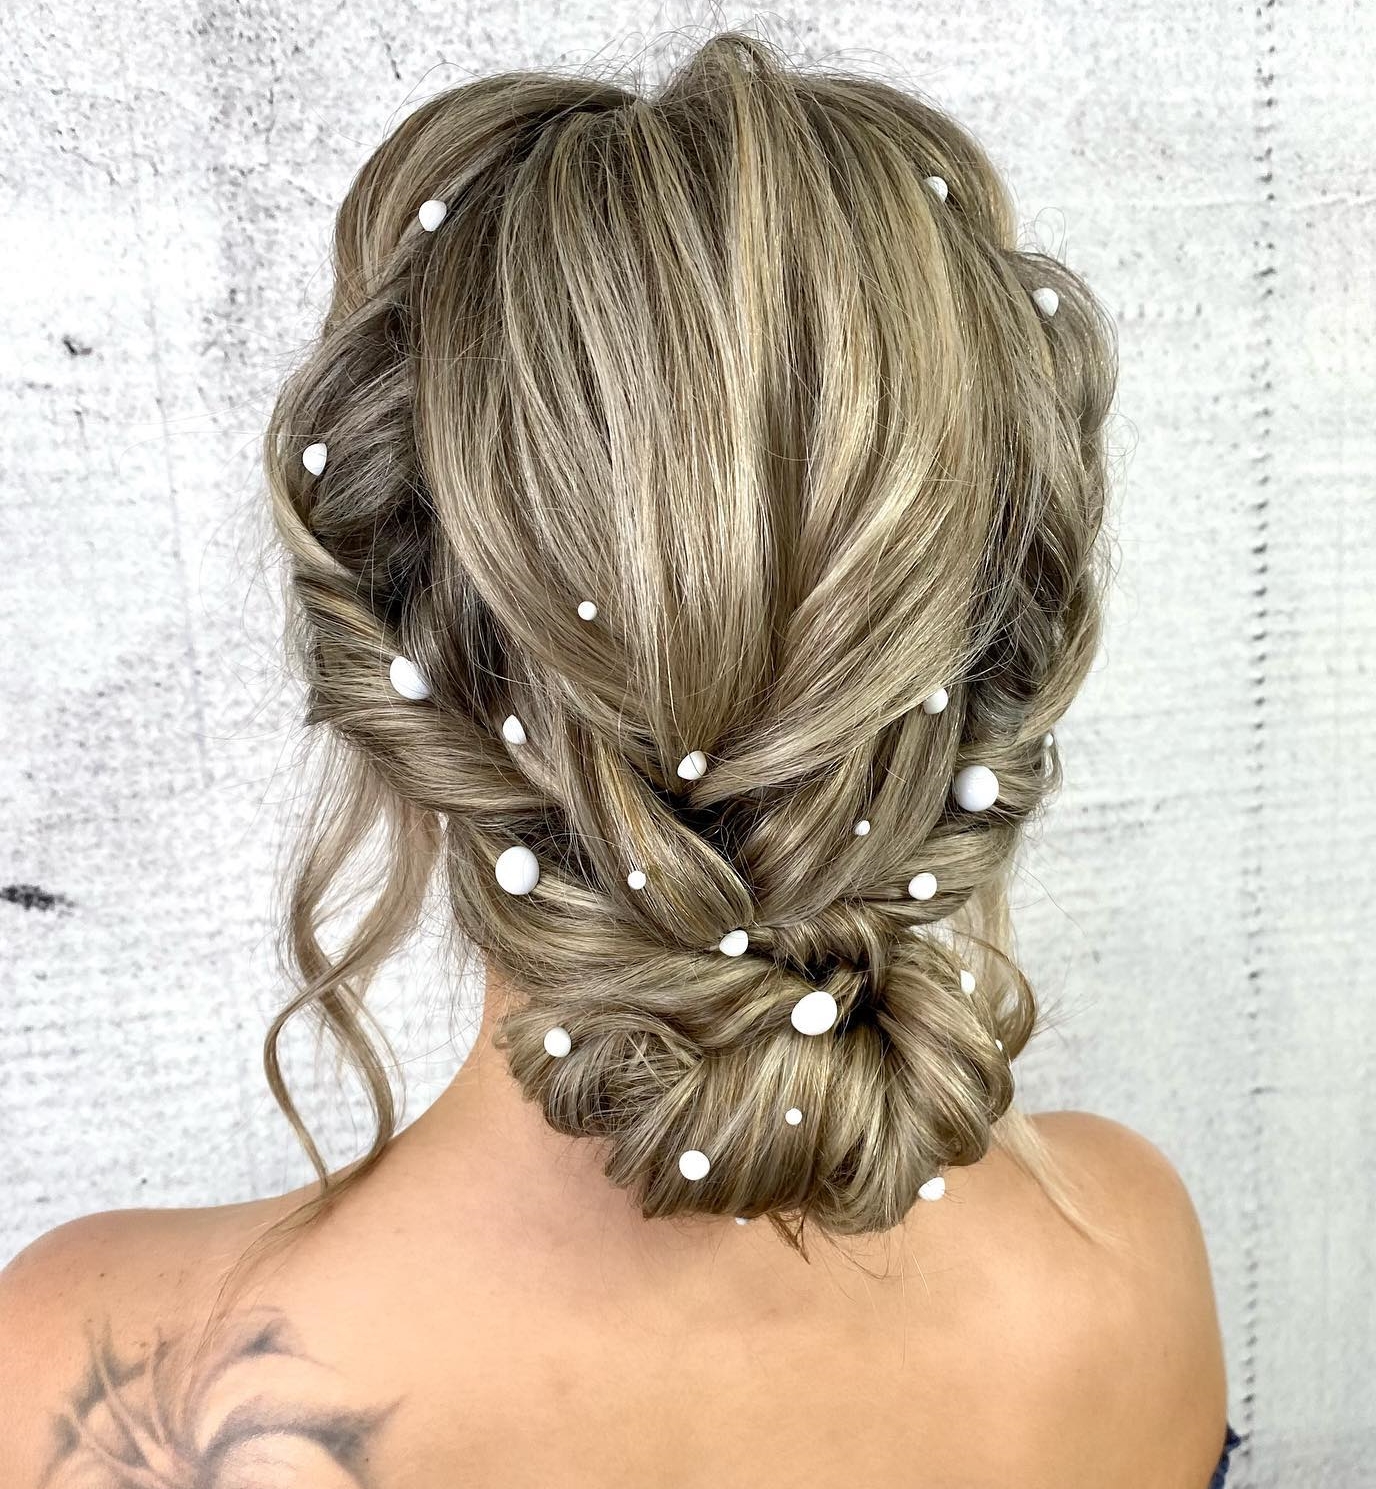 50 Romantic Wedding Hairstyles To Bring The Brides Image To Perfection Hairstylery 2594